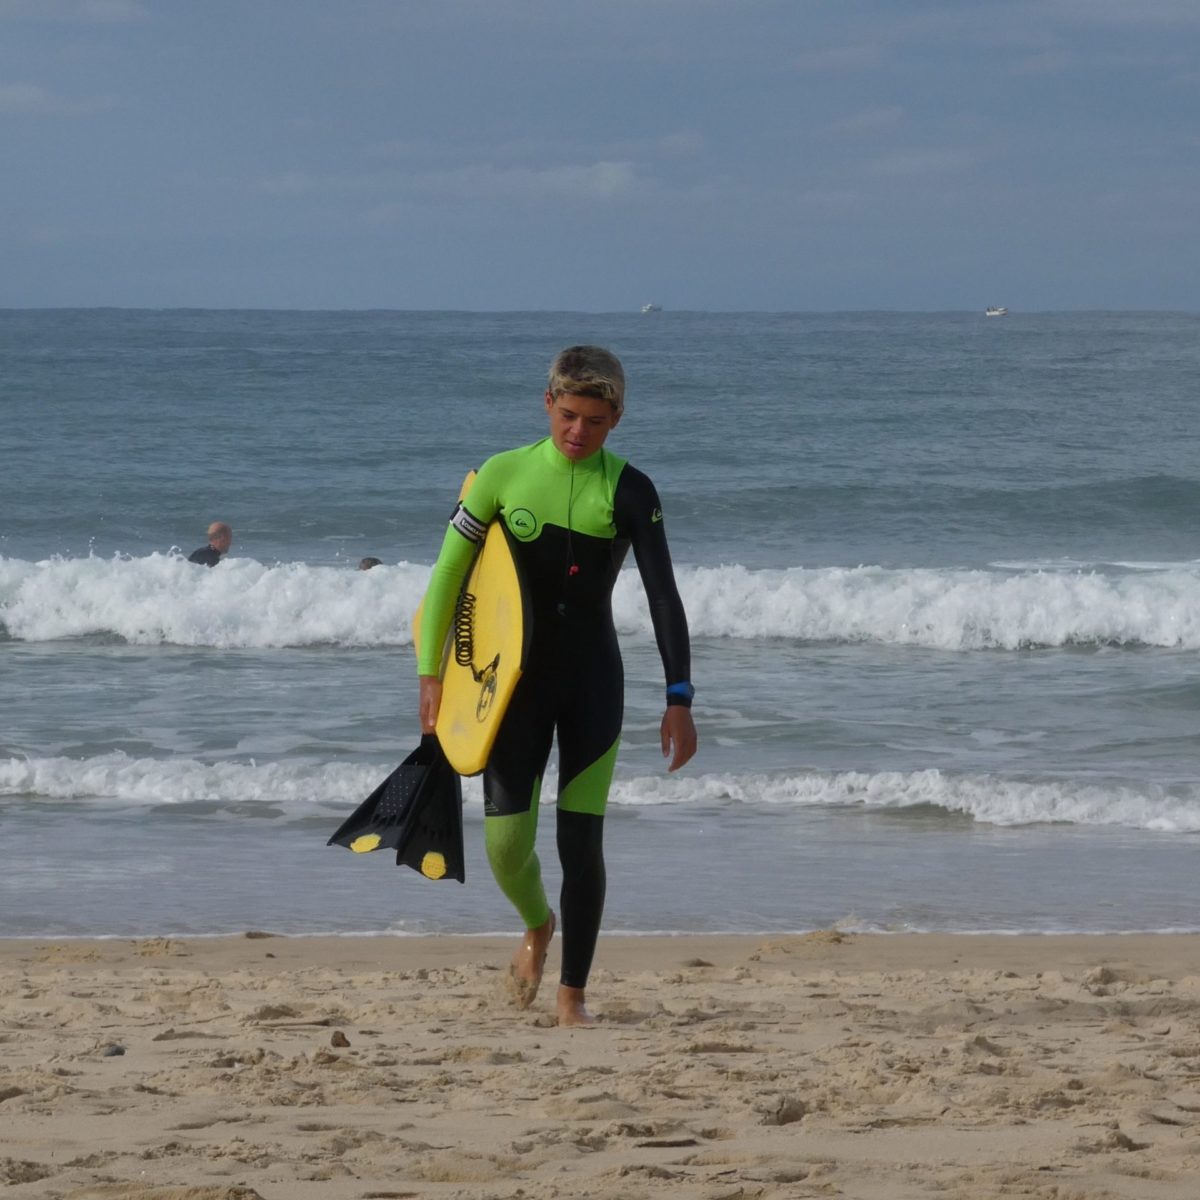 http://www.ligue-bretagne-surf.bzh/wp-content/uploads/2020/05/Maxime-Bourgine-scaled-e1590389431522-1200x1200.jpg